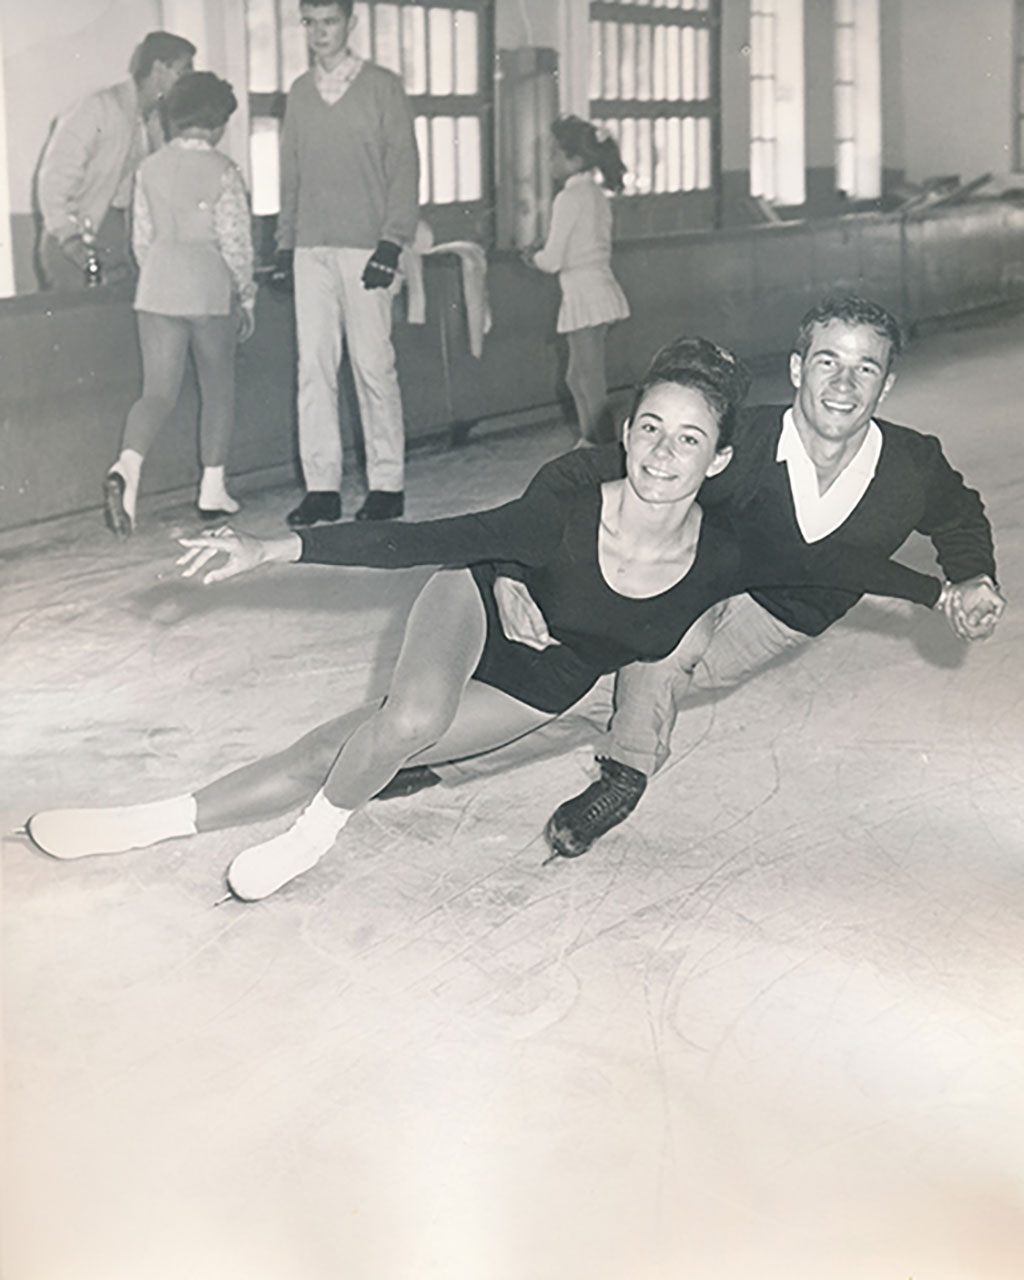 An archival black and white photo of a beautiful young couple doing figure skating.